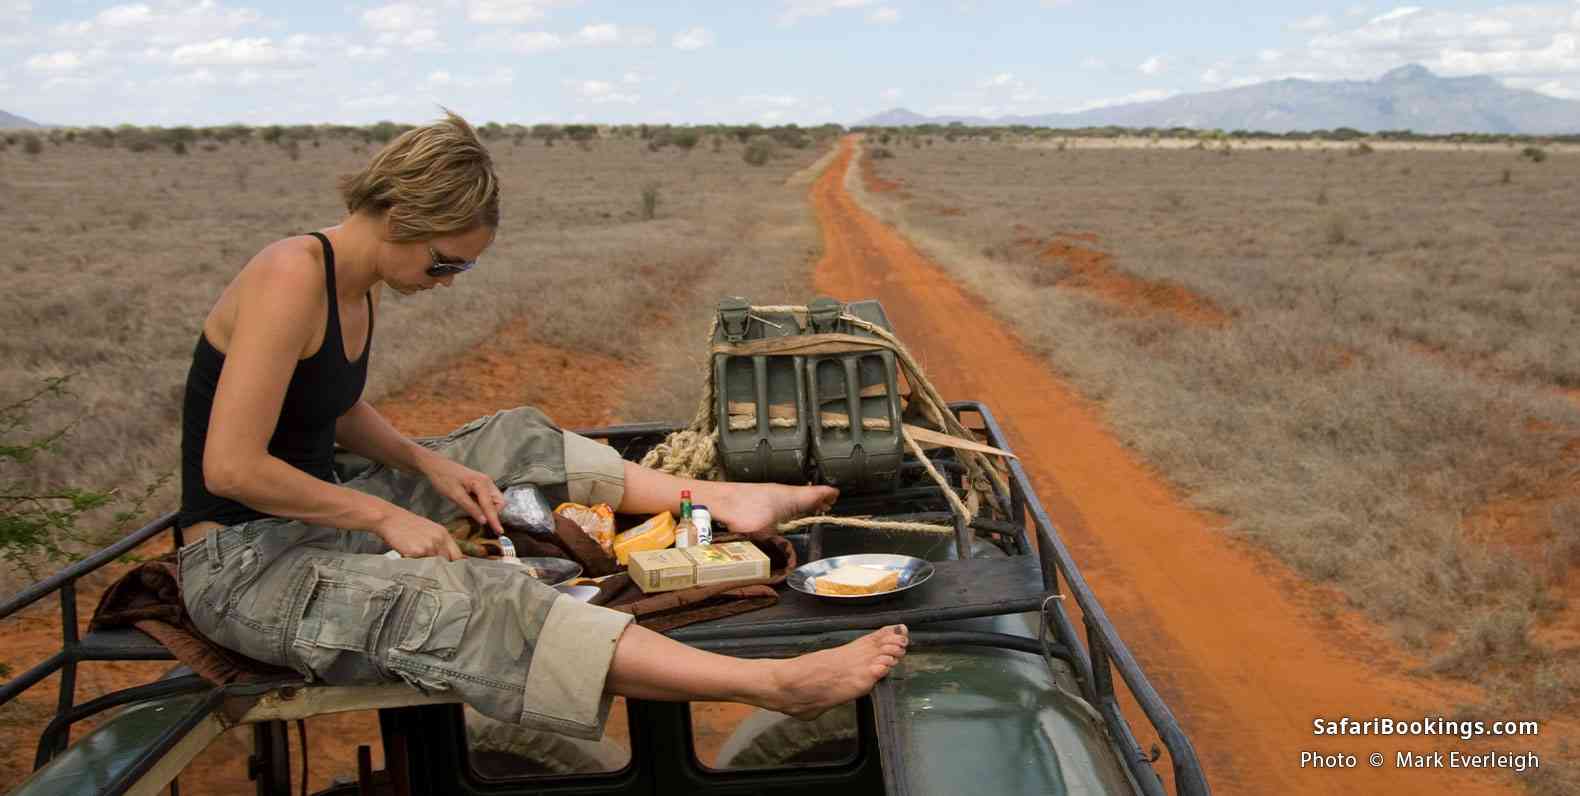 Lunch on top of the landrover